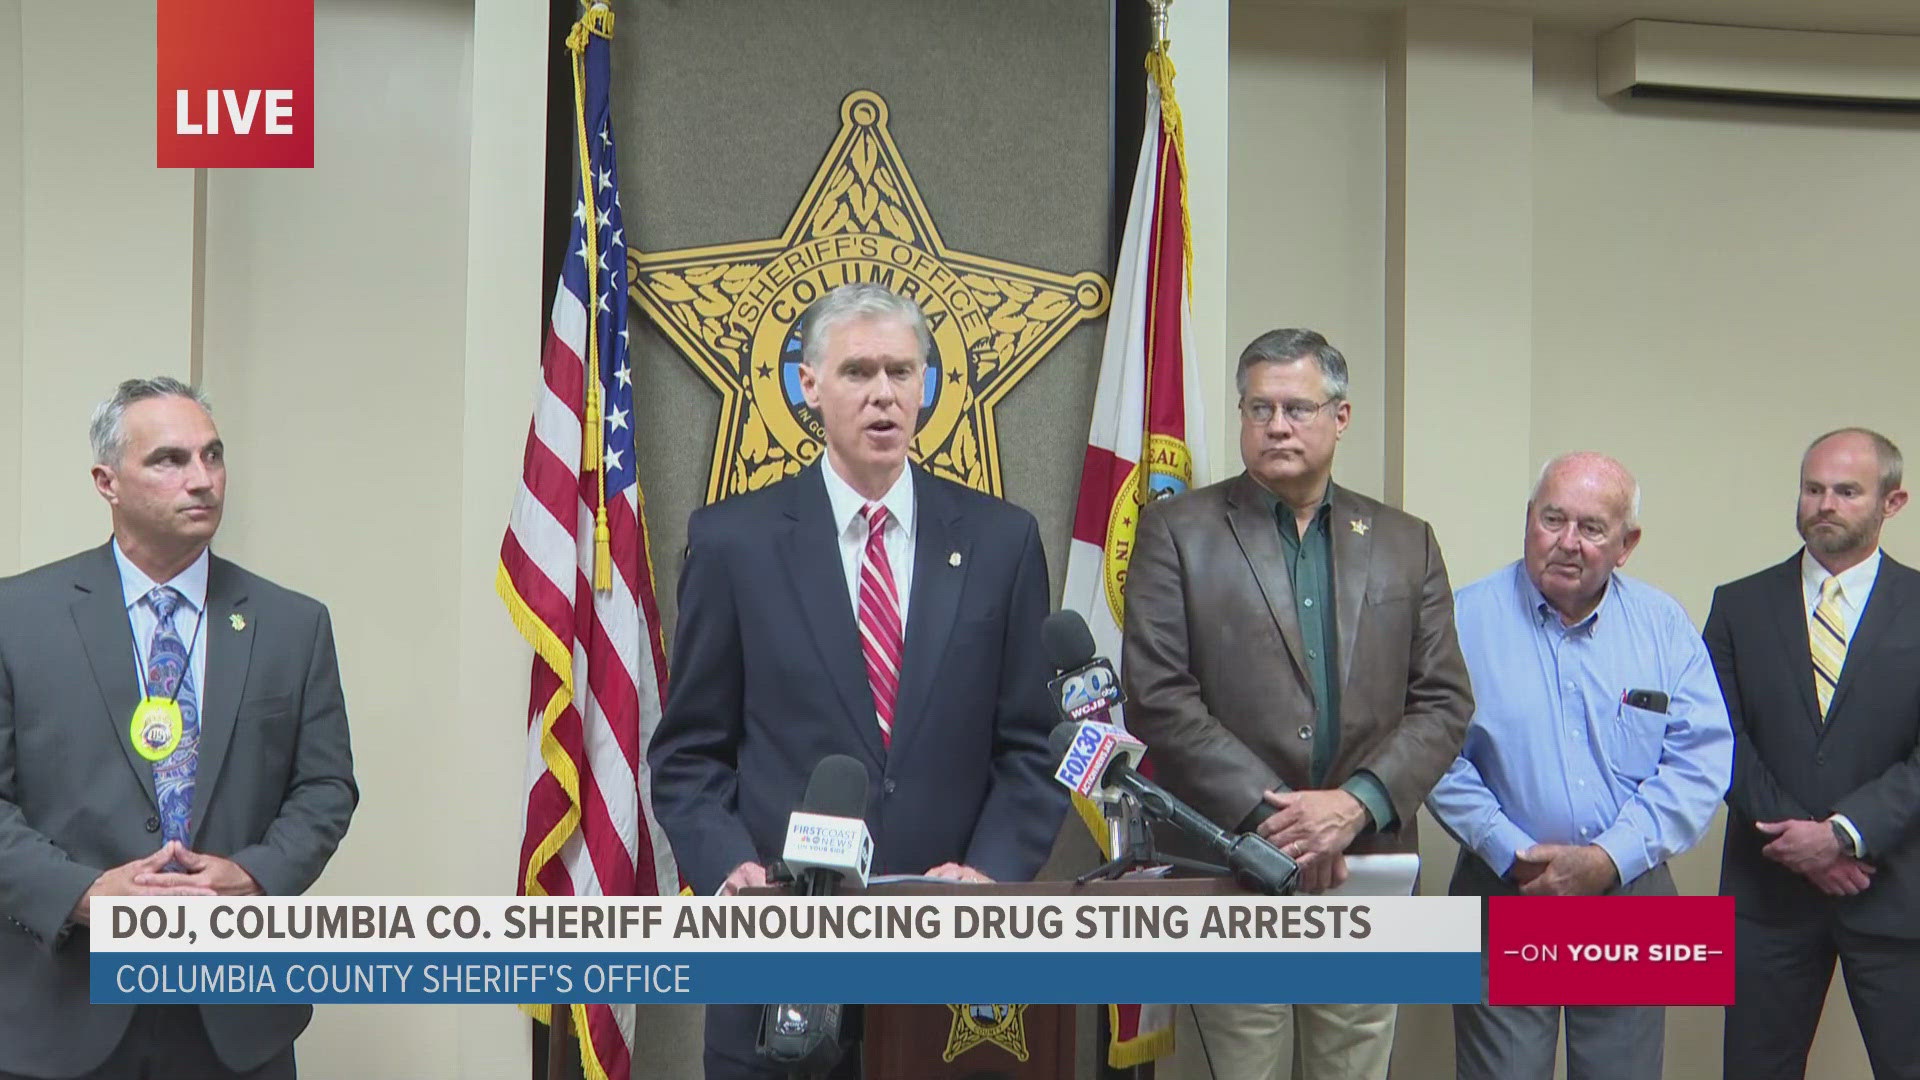 U.S. Attorney Roger Handberg says the arrests and cocaine seized, as well as methamphetamine and fentanyl, were made during a two-day training.